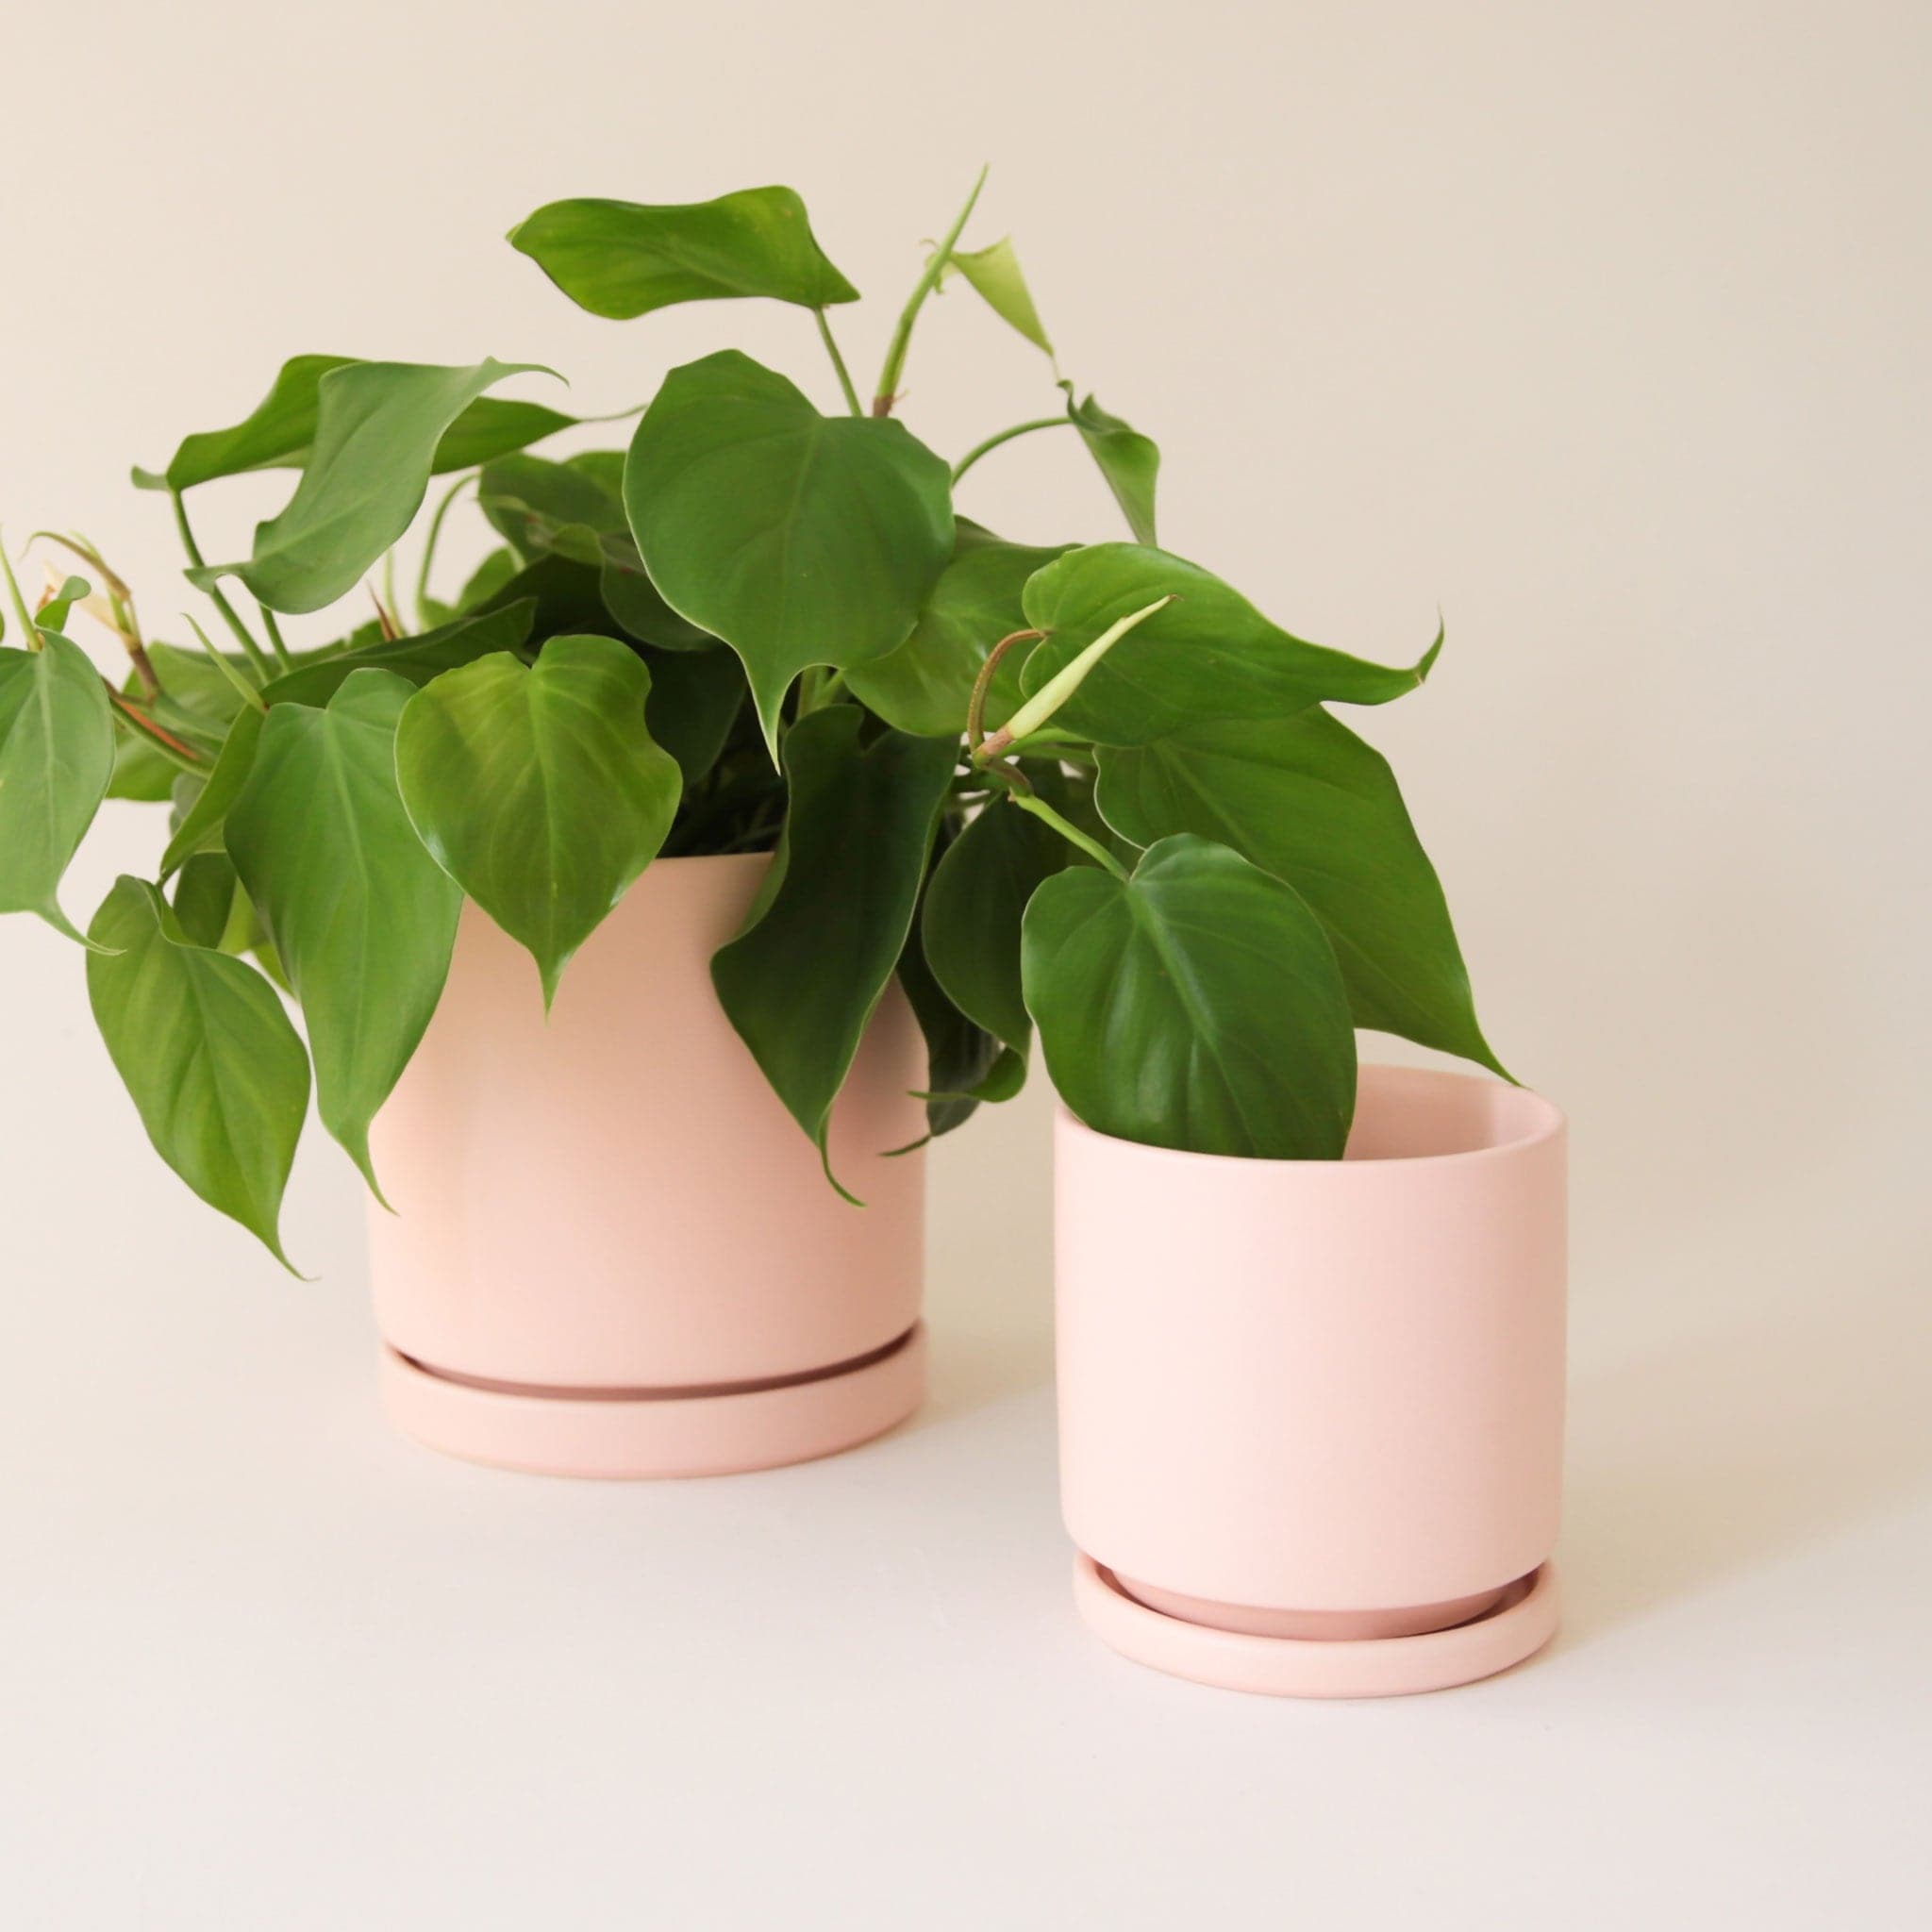 On a cream background is two different sized ceramic pots in a light pink shaded with removable trays for watering and a green plant inside that is not included with purchase. 